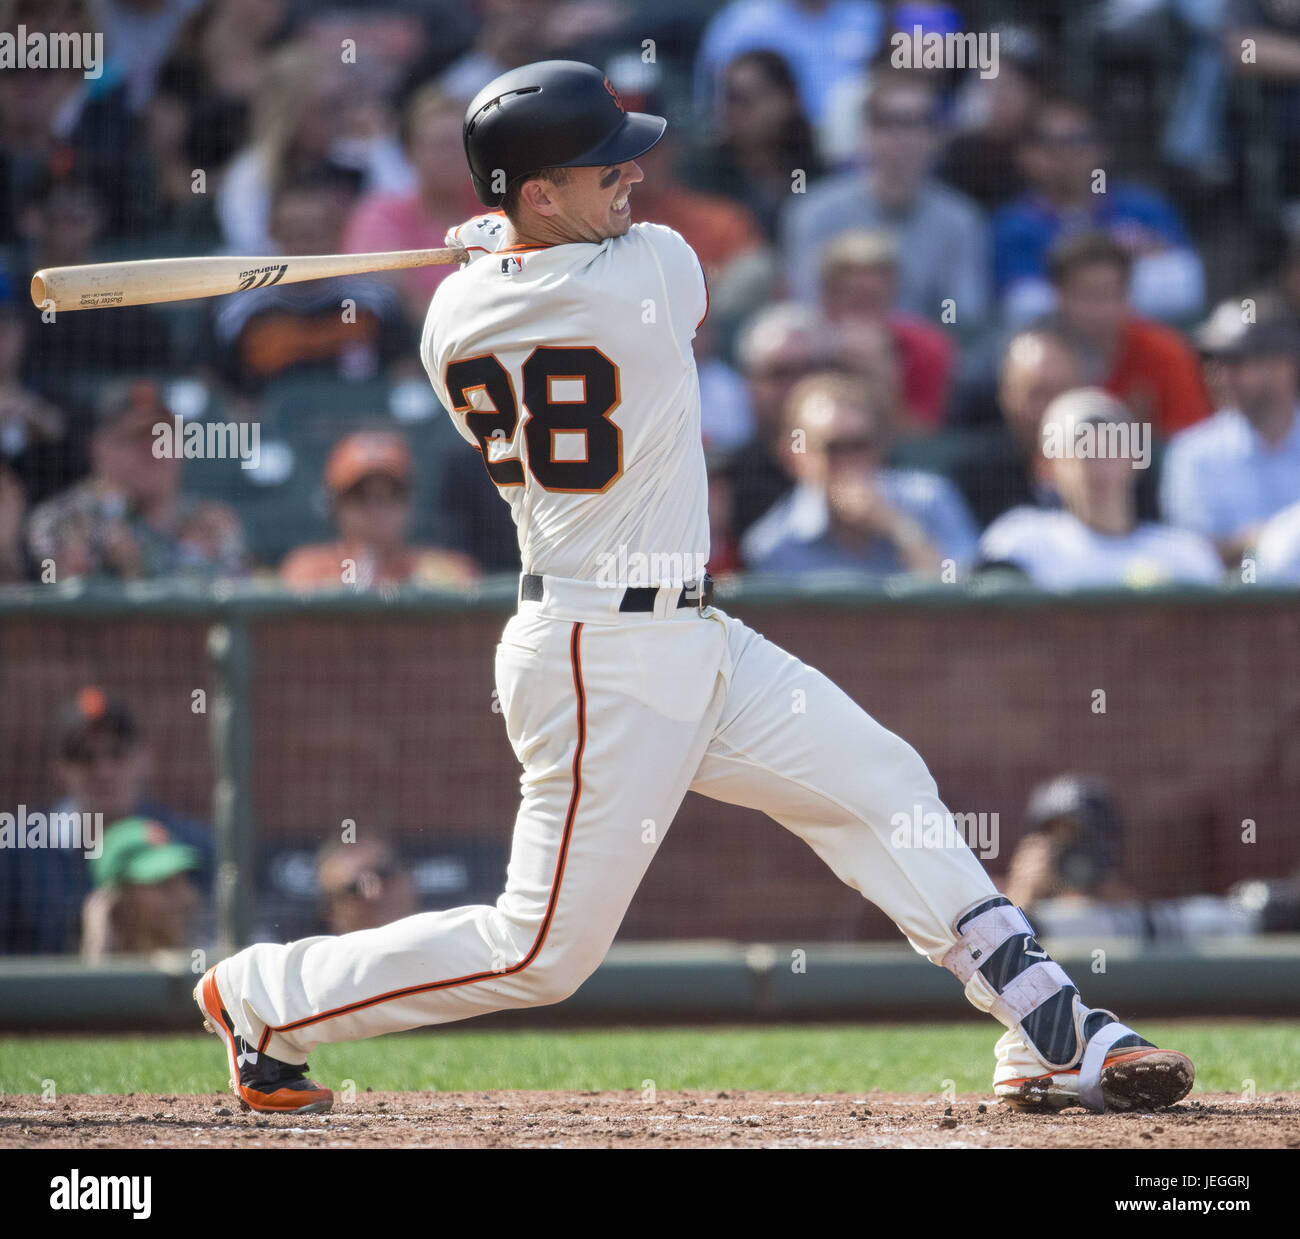 San Francisco, California, USA. 24th June, 2017. San Francisco Giants catcher Buster Posey (28) batting during the bottom of the fourth inning, a MLB baseball game between the New York Mets and the San Francisco Giants on ''Giants Retro Bobblehead Day'' at AT&T Park in San Francisco, California. Valerie Shoaps/CSM/Alamy Live News Stock Photo